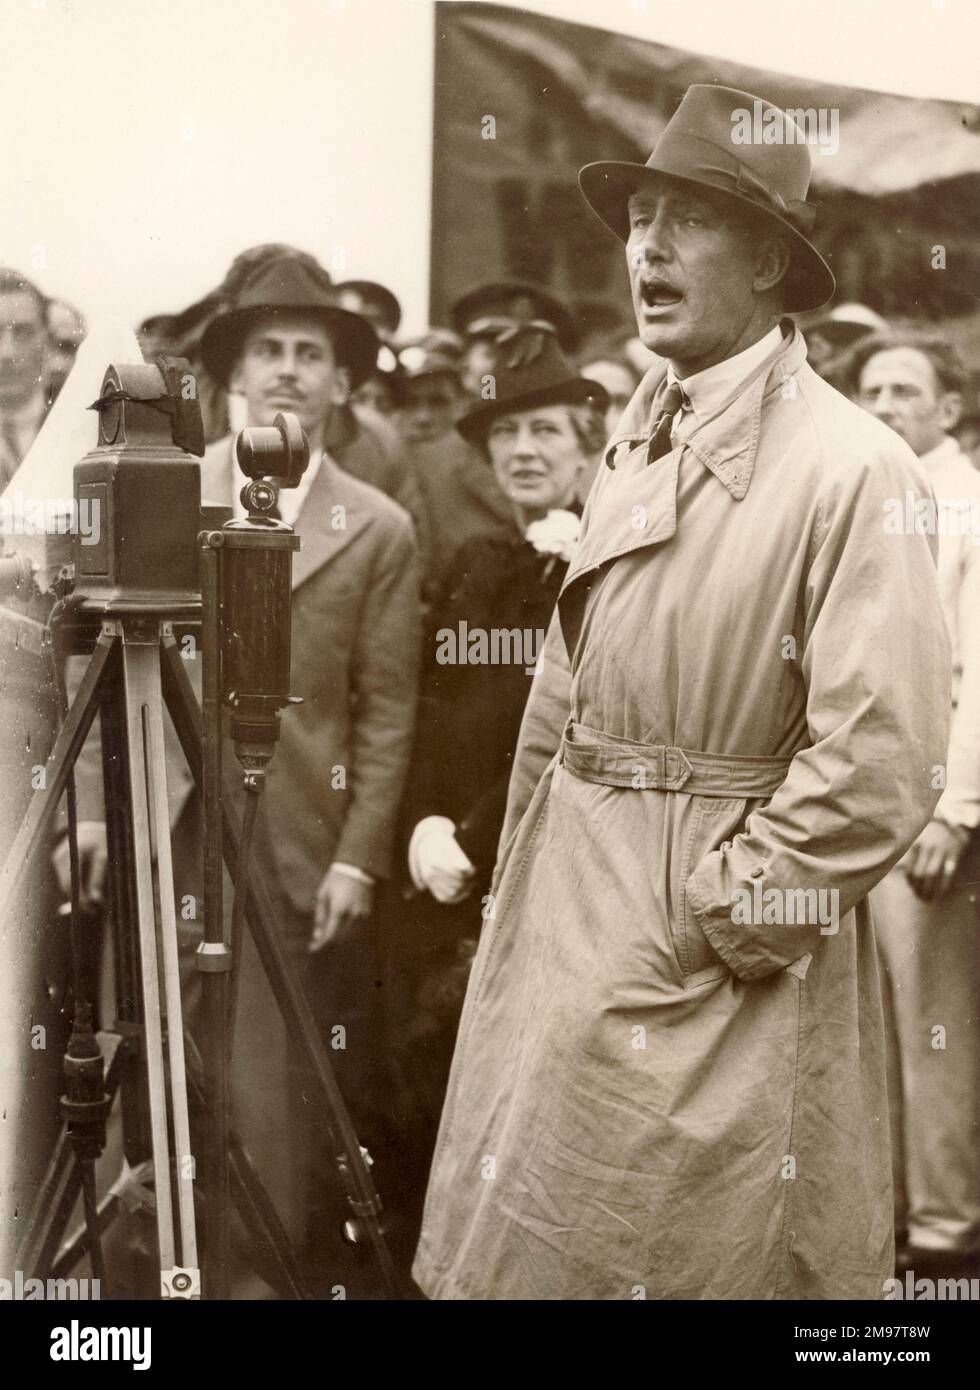 C.W.A. Scott making a speech at Croydon after winning the Schlesinger Portsmouth to Johannesburg race. Co-pilot Giles Gutherie is left and Lady Connop Guthrie centre. October 1936. Stock Photo